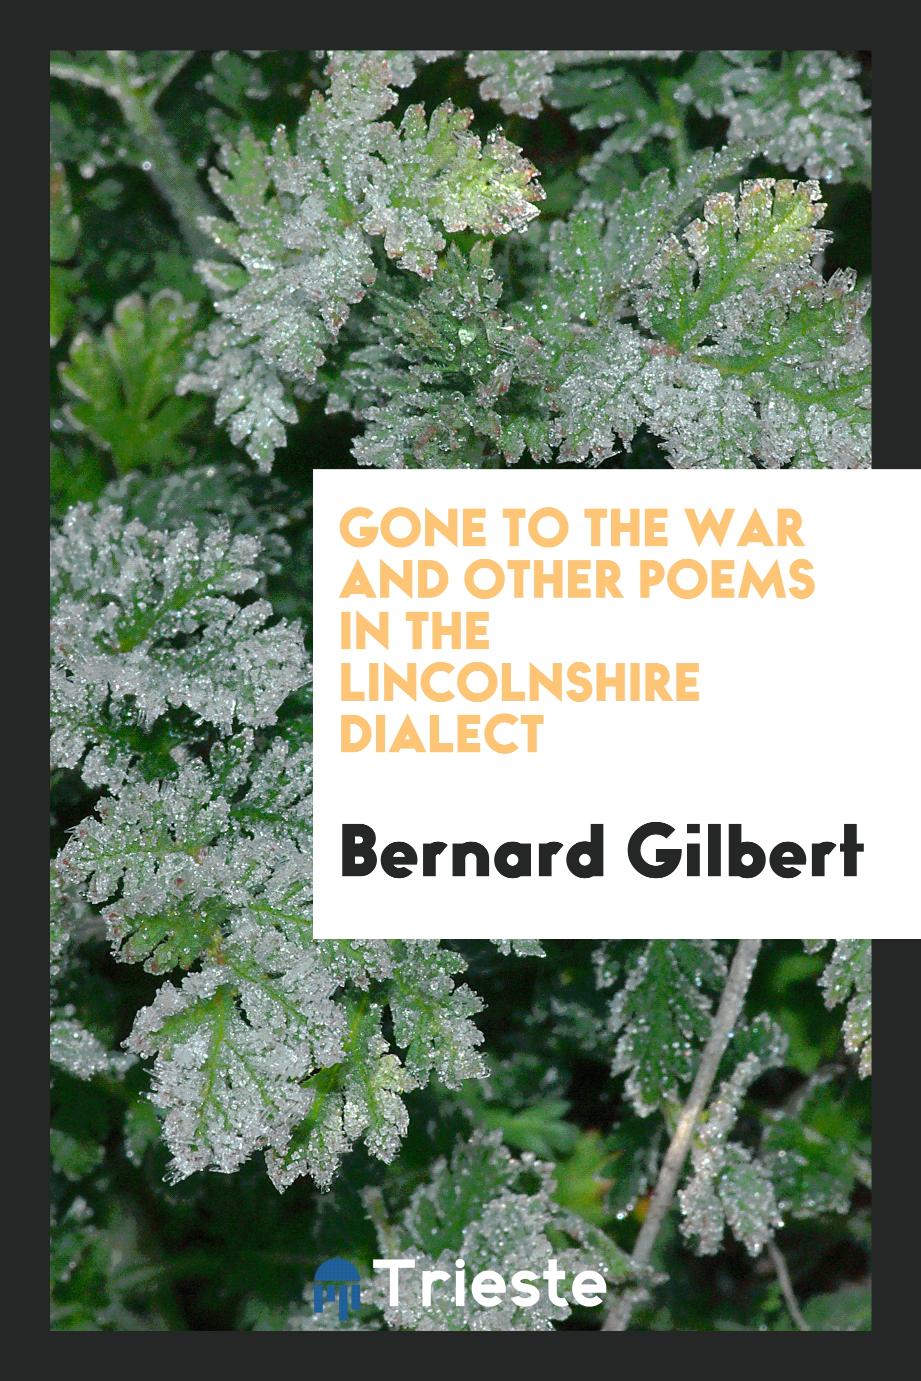 Gone to the war and other poems in the Lincolnshire dialect